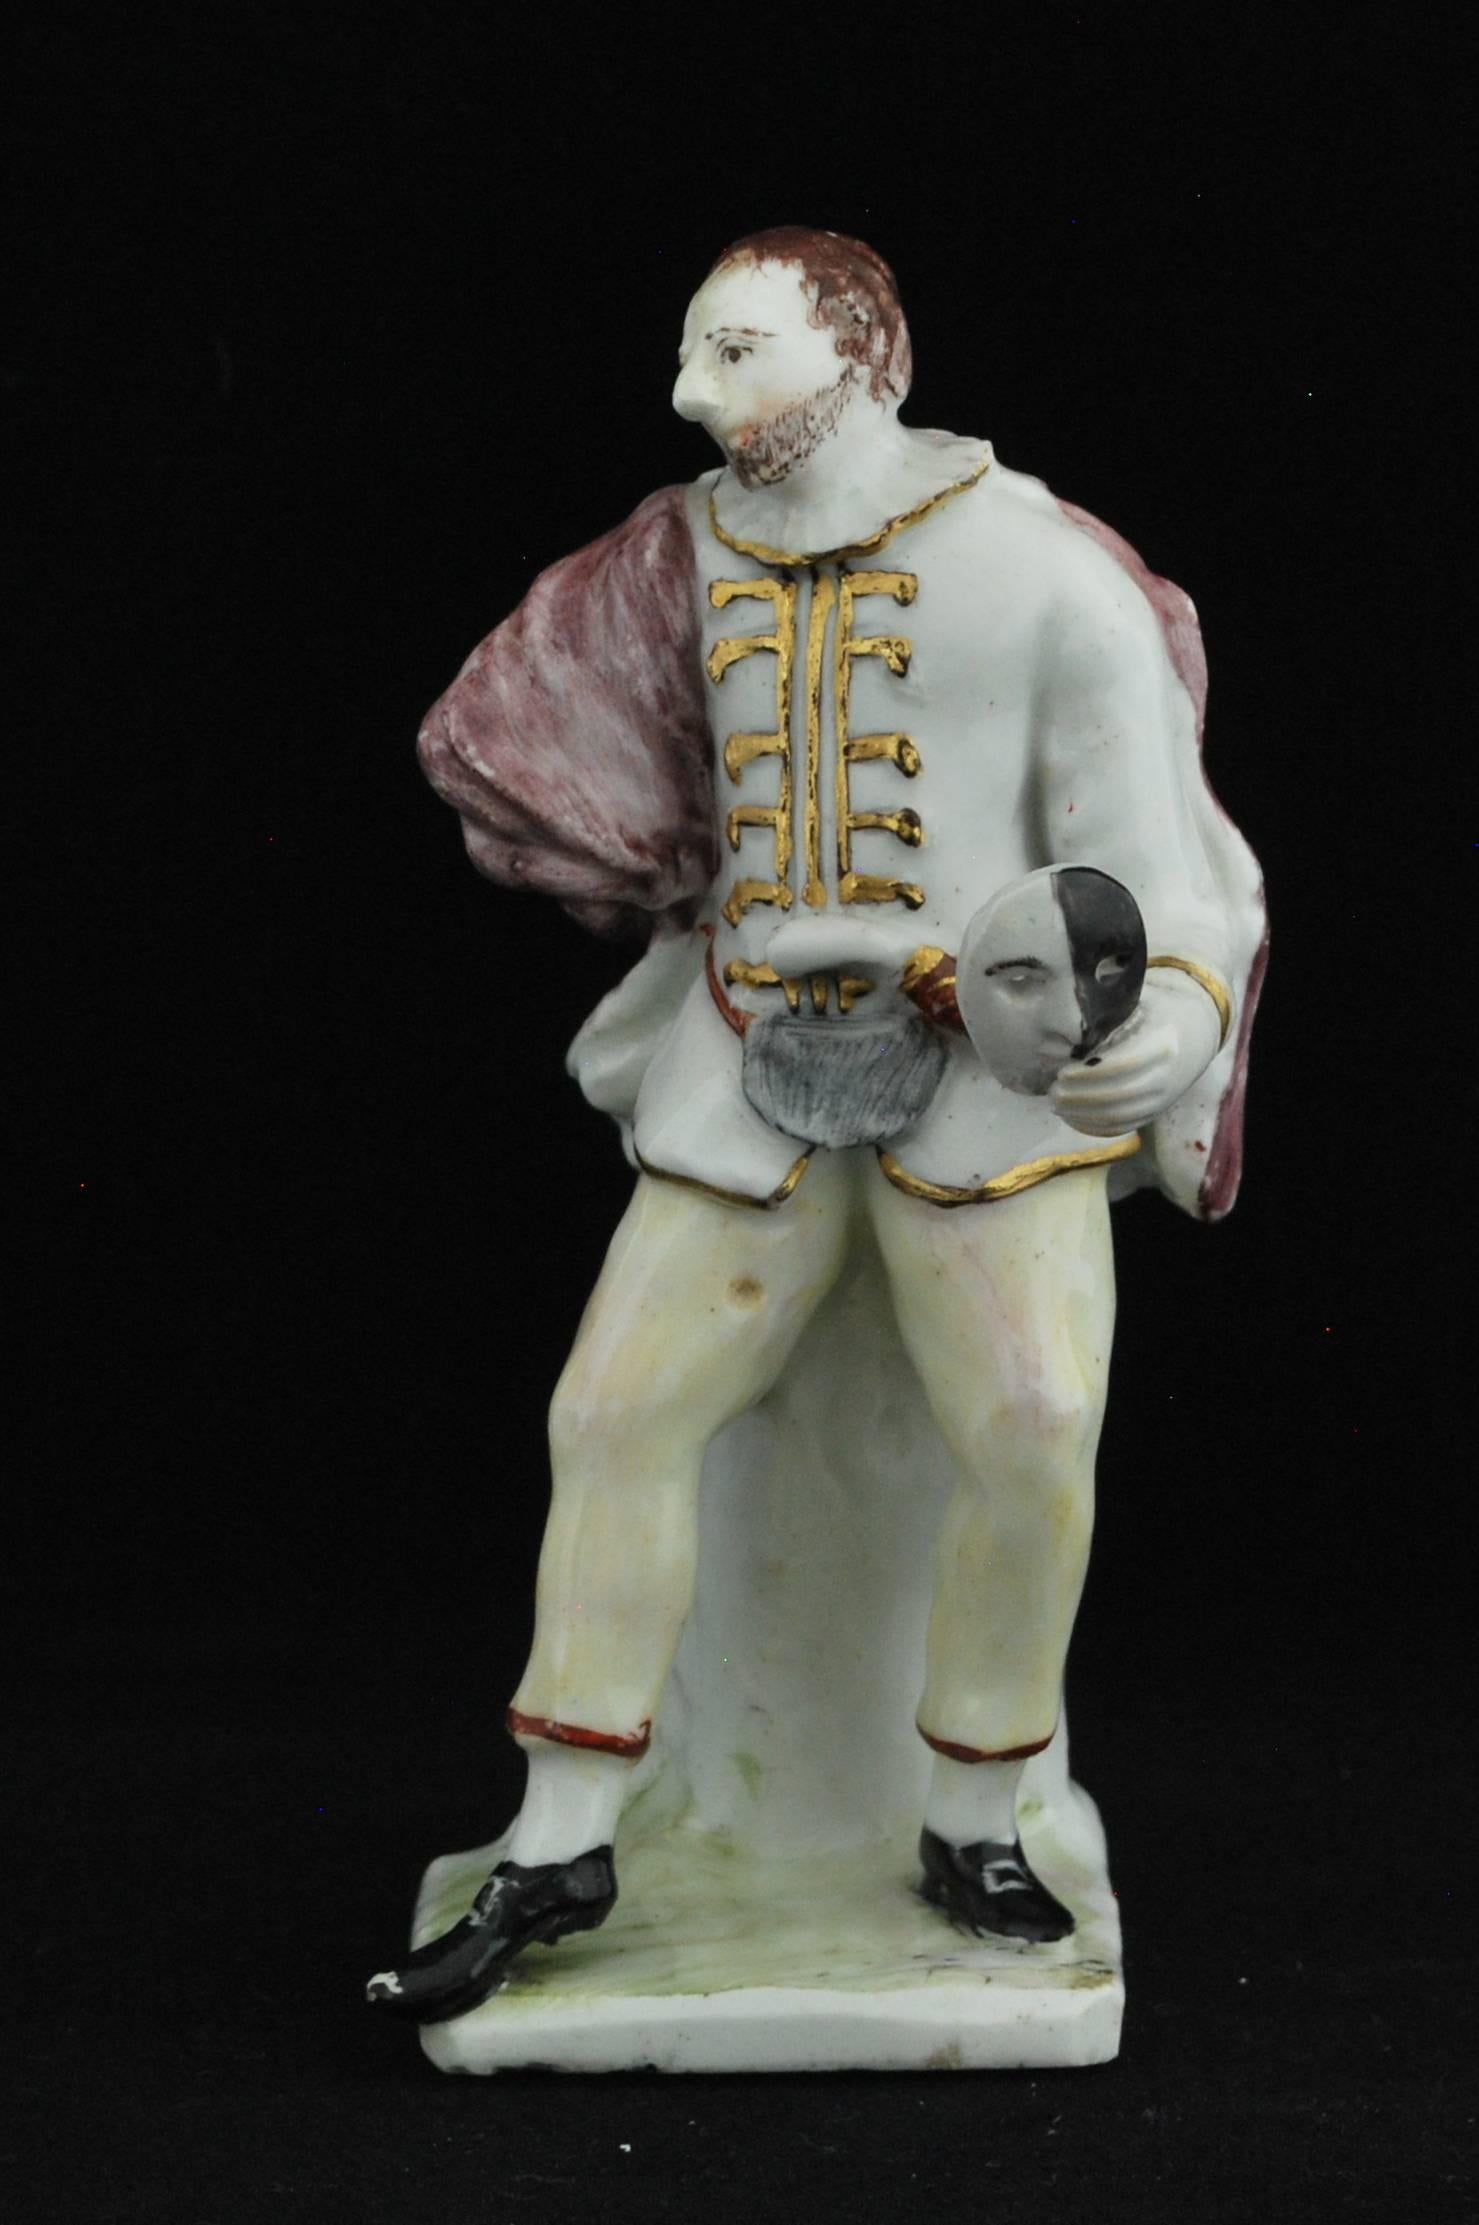 Scappino, or Scapin, a zany (zanni) character from the commedia dell'arte: a buffoon, schemer and scoundrel, and the title character in Molière's Les Fourberies de Scapin, first staged in 1671. The Bow figure shows him standing to right against a